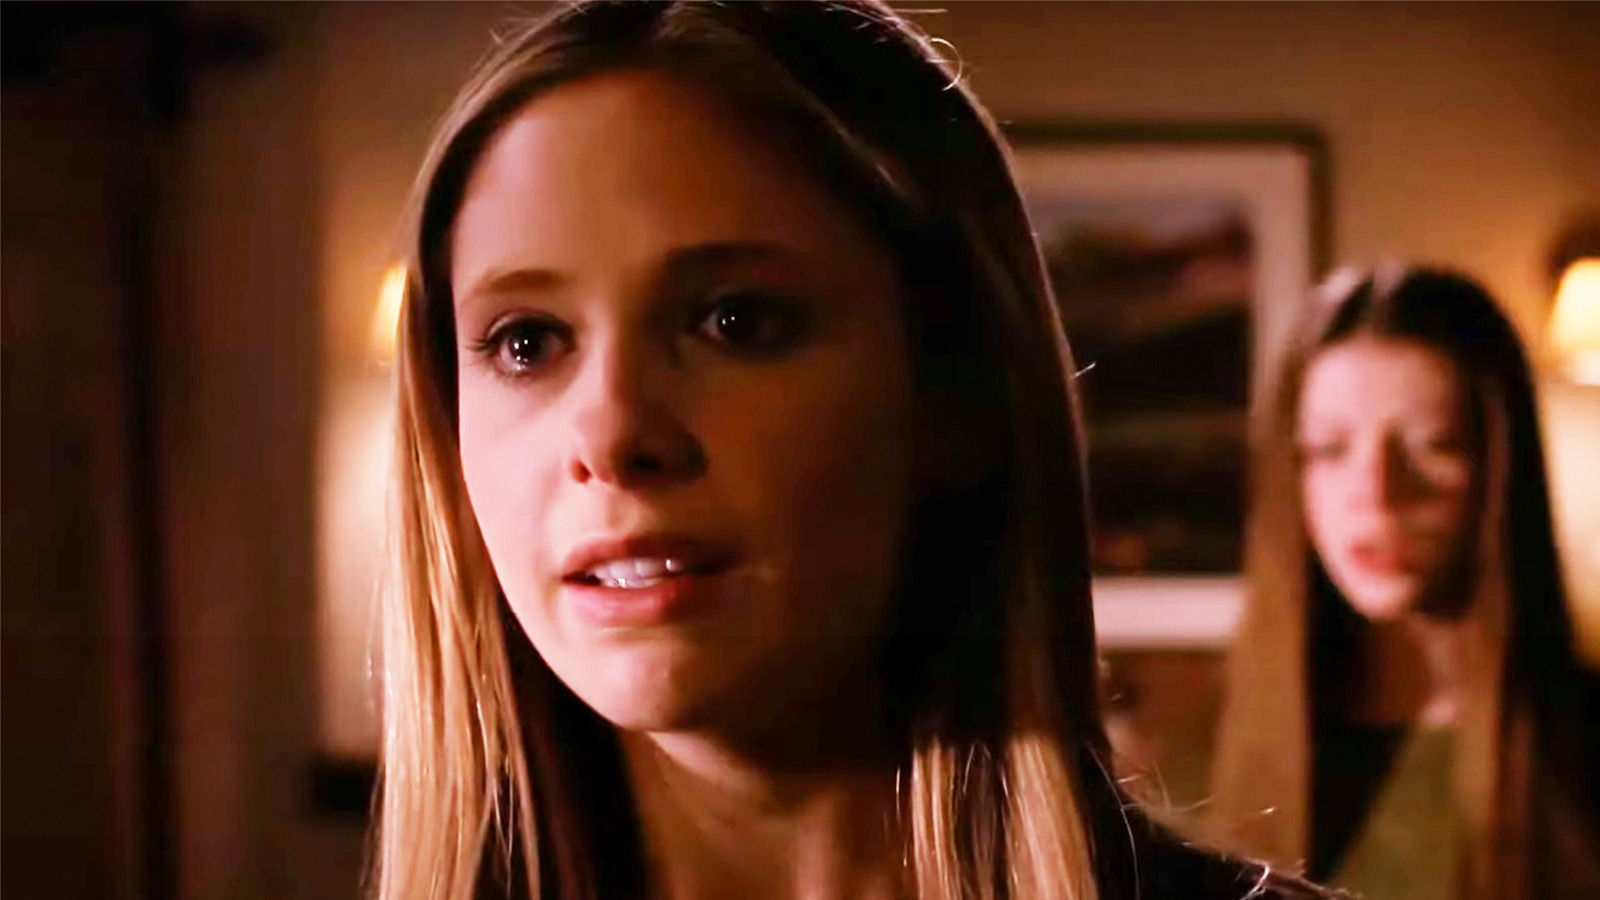 The Creepiest Episode Of Buffy The Vampire Slayer Still Freaks Us Out Decades Later